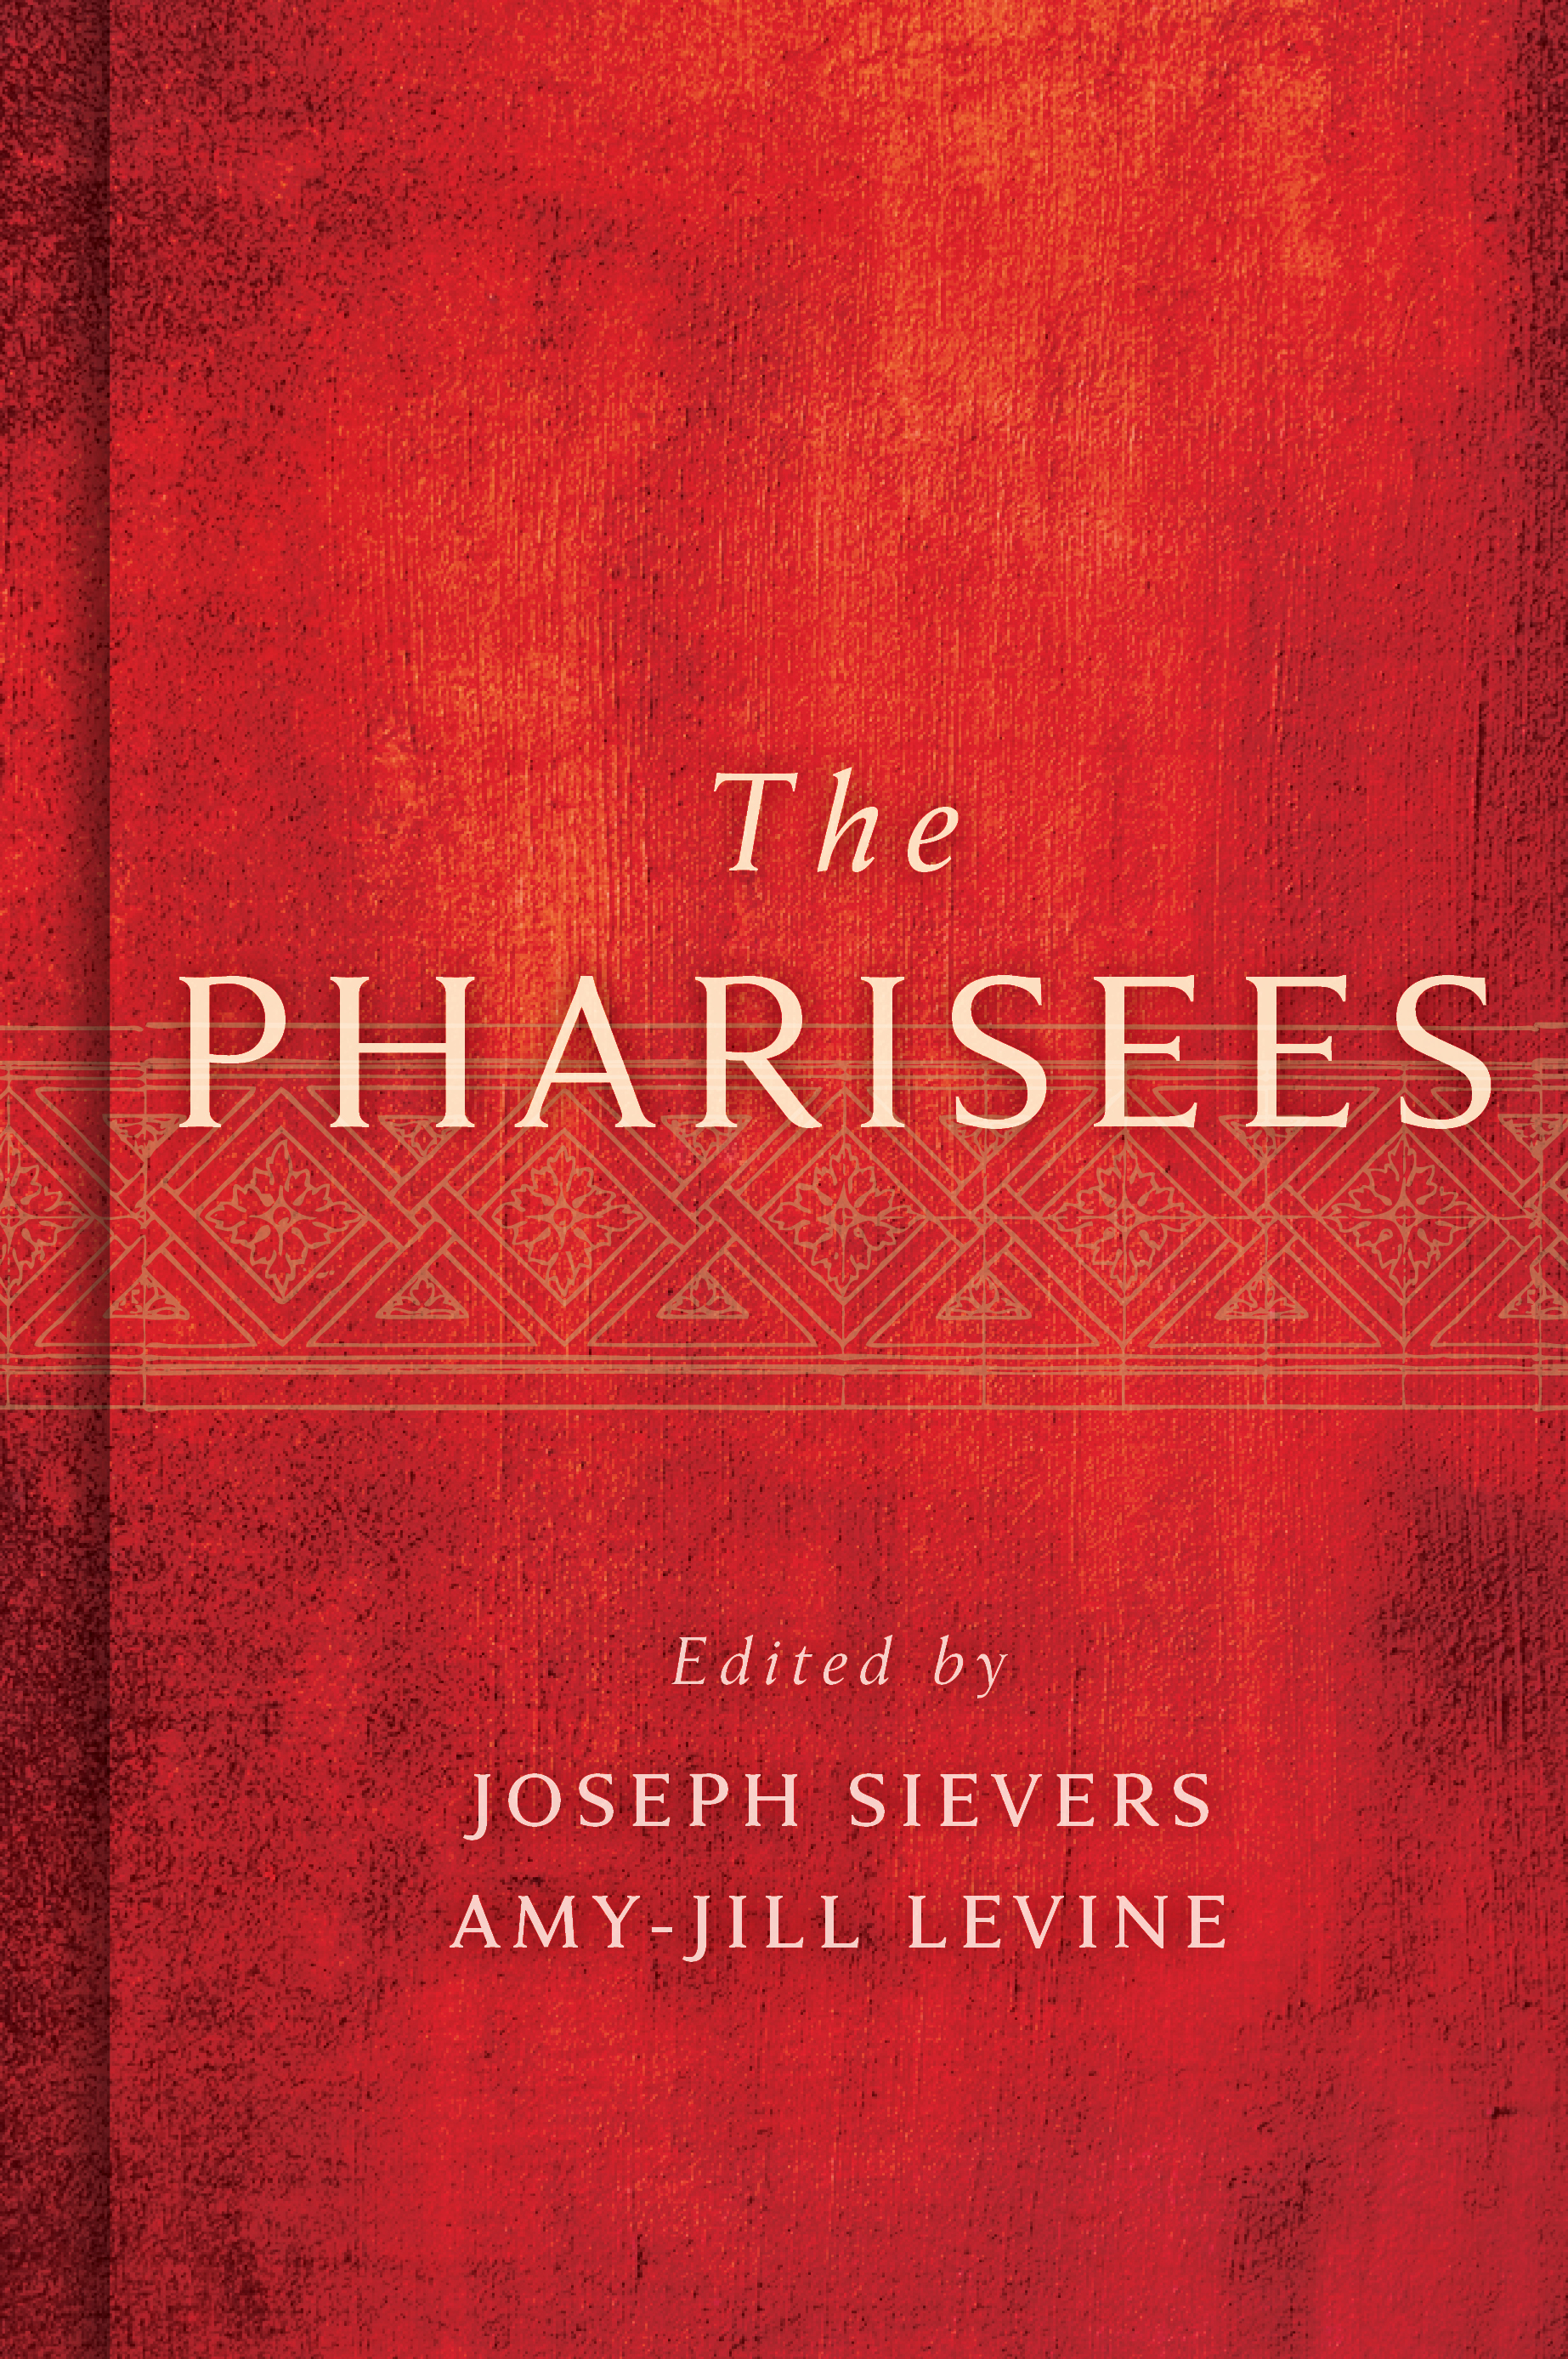 "The Pharisees" book cover